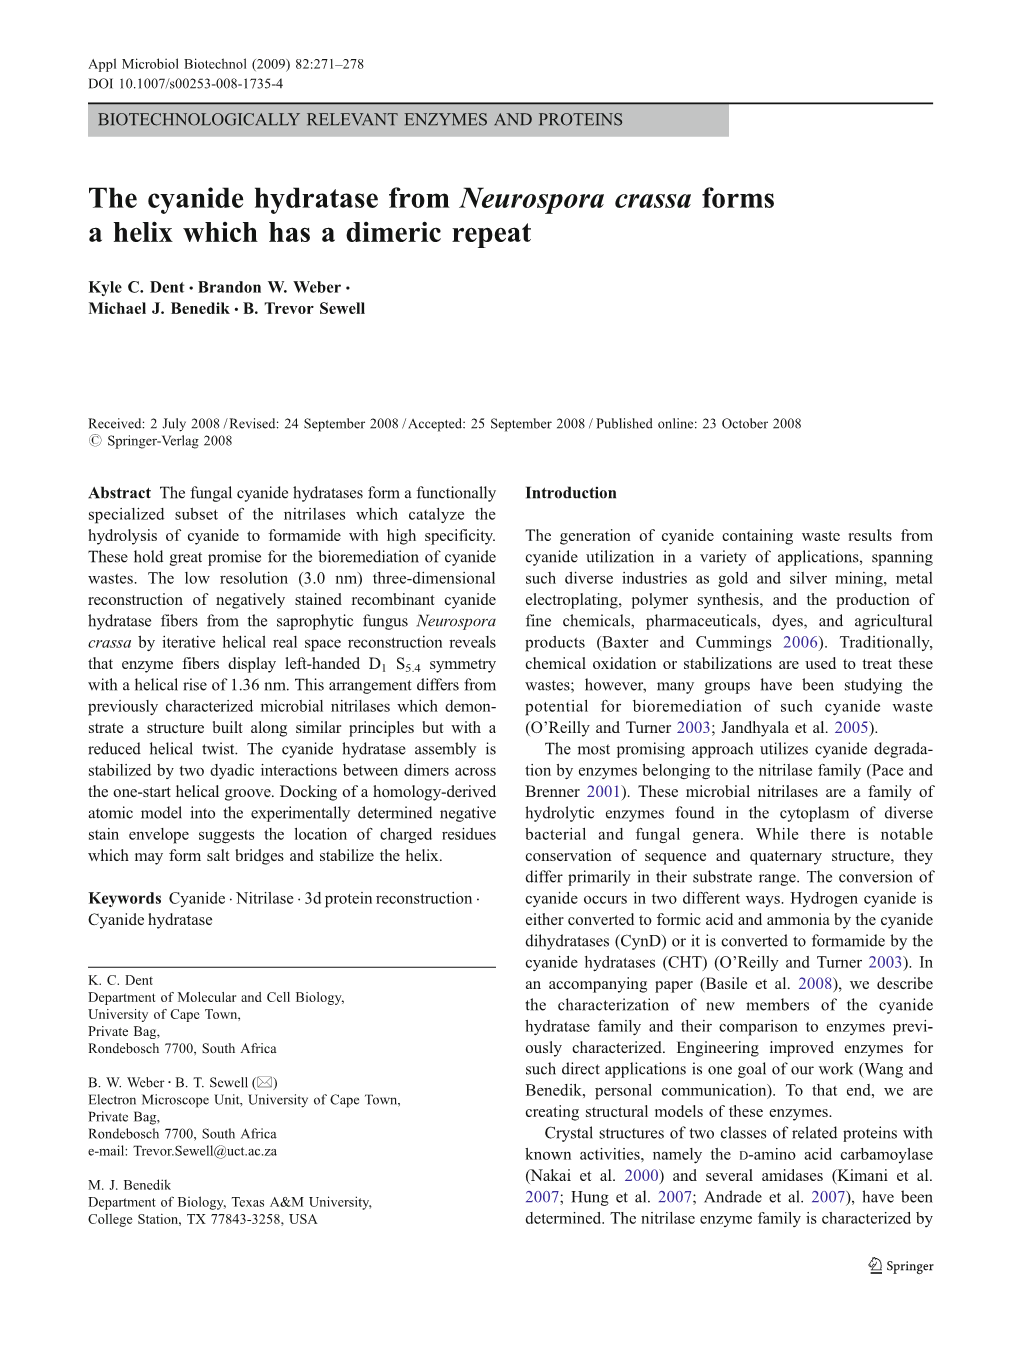 The Cyanide Hydratase from Neurospora Crassa Forms a Helix Which Has a Dimeric Repeat